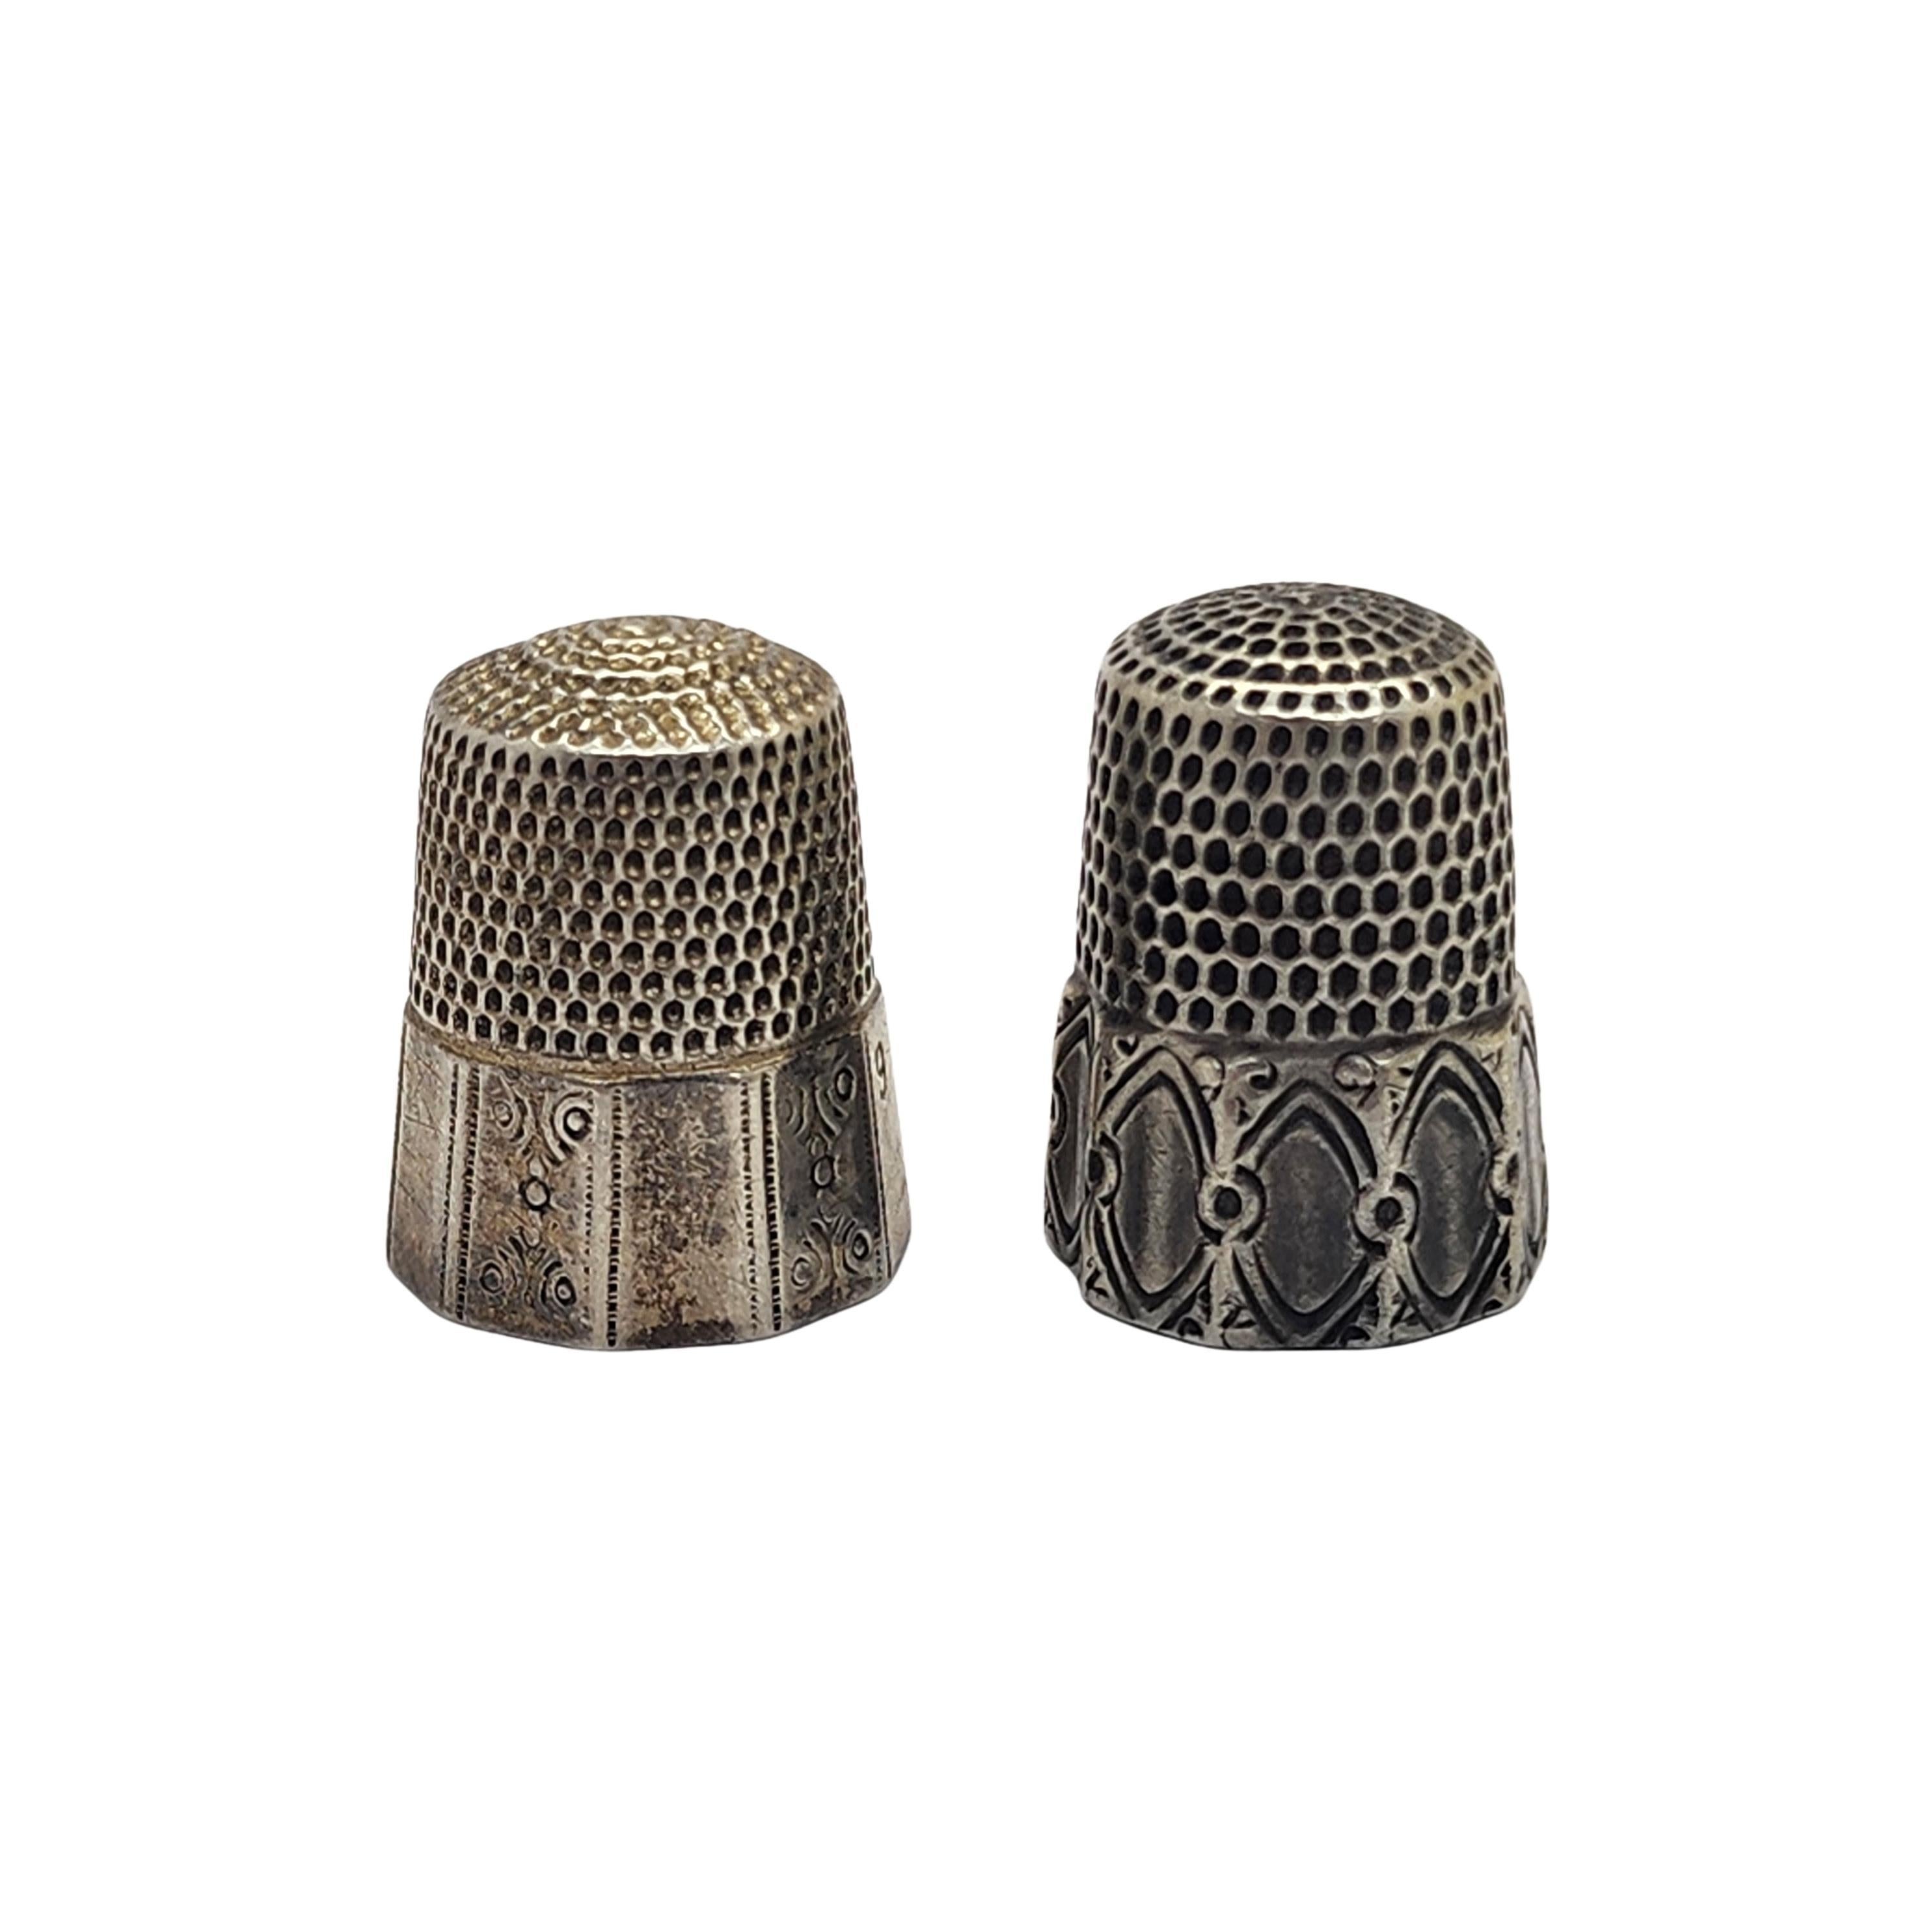 Set of 2 sterling silver thimble by Simon Bros Sizes 8 and 9.

Both thimbles feature etched fluted panels.
 
Both thimbles measure approx 3/4